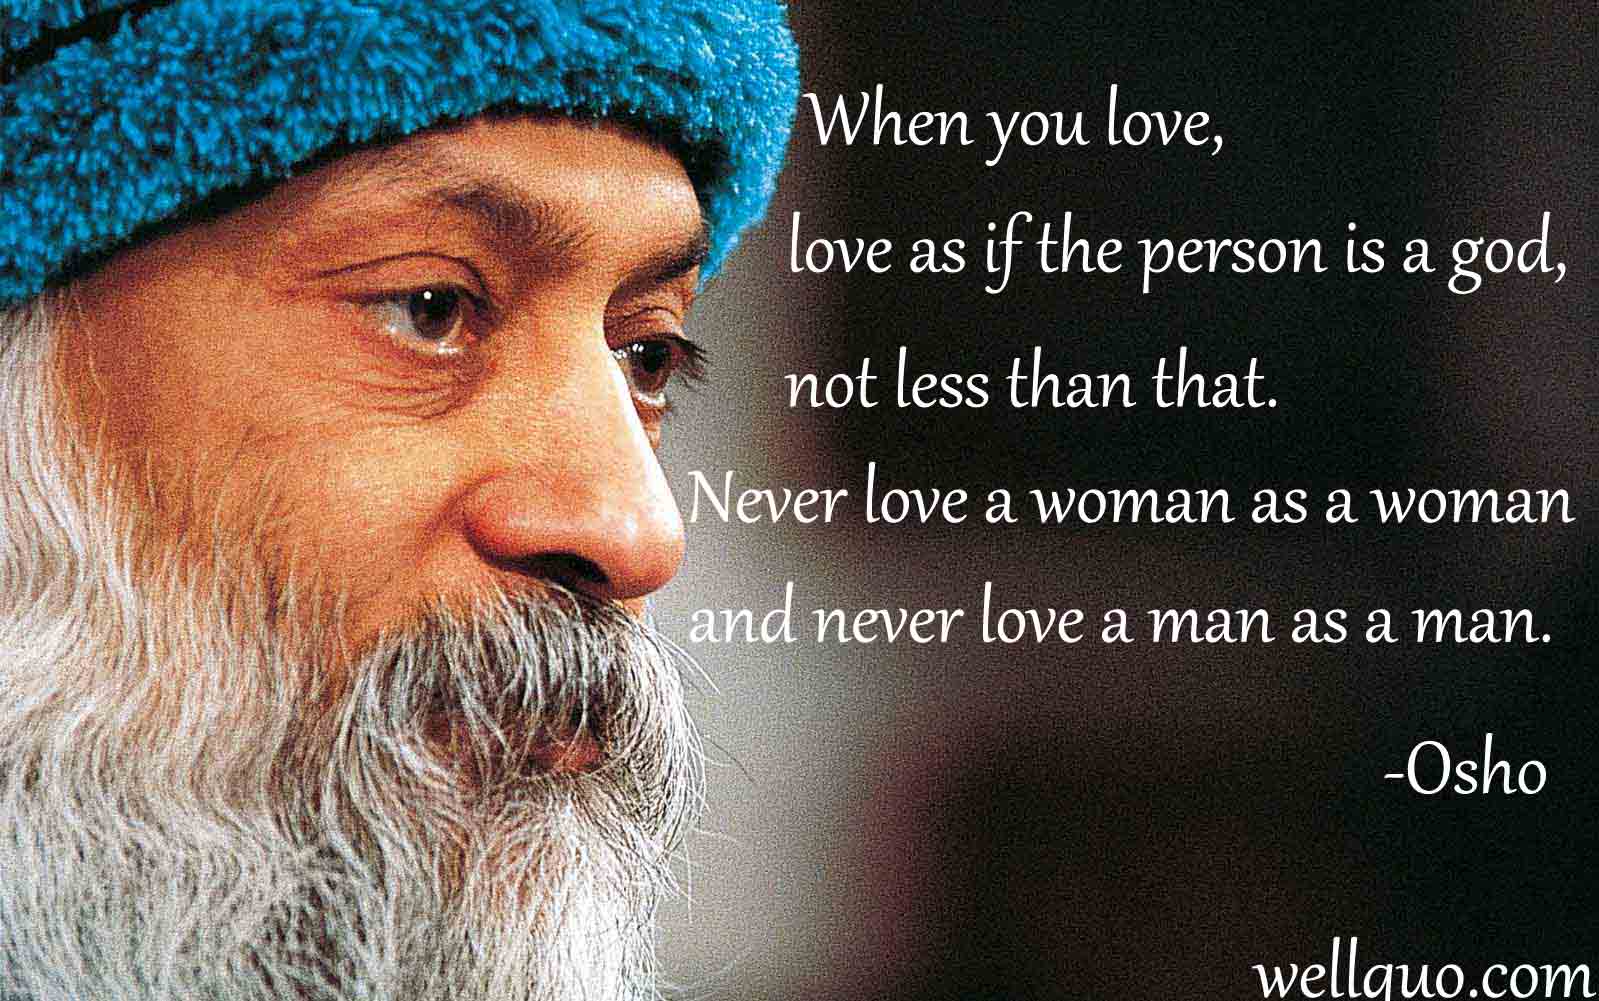 Osho Quotes on Life & Love - Wellquo.com